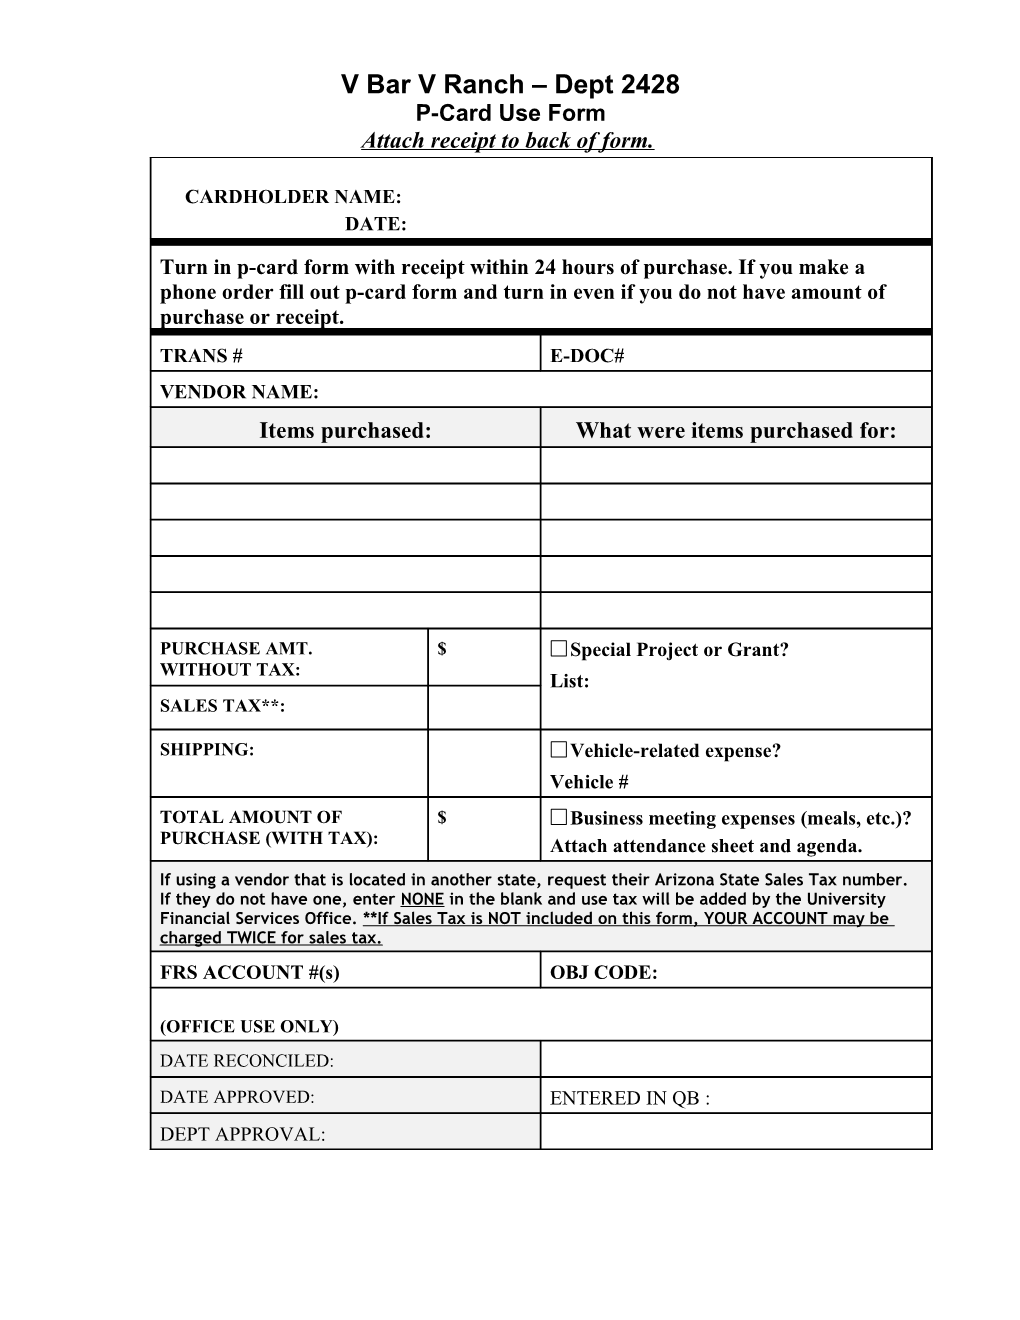 P-Card Use Form